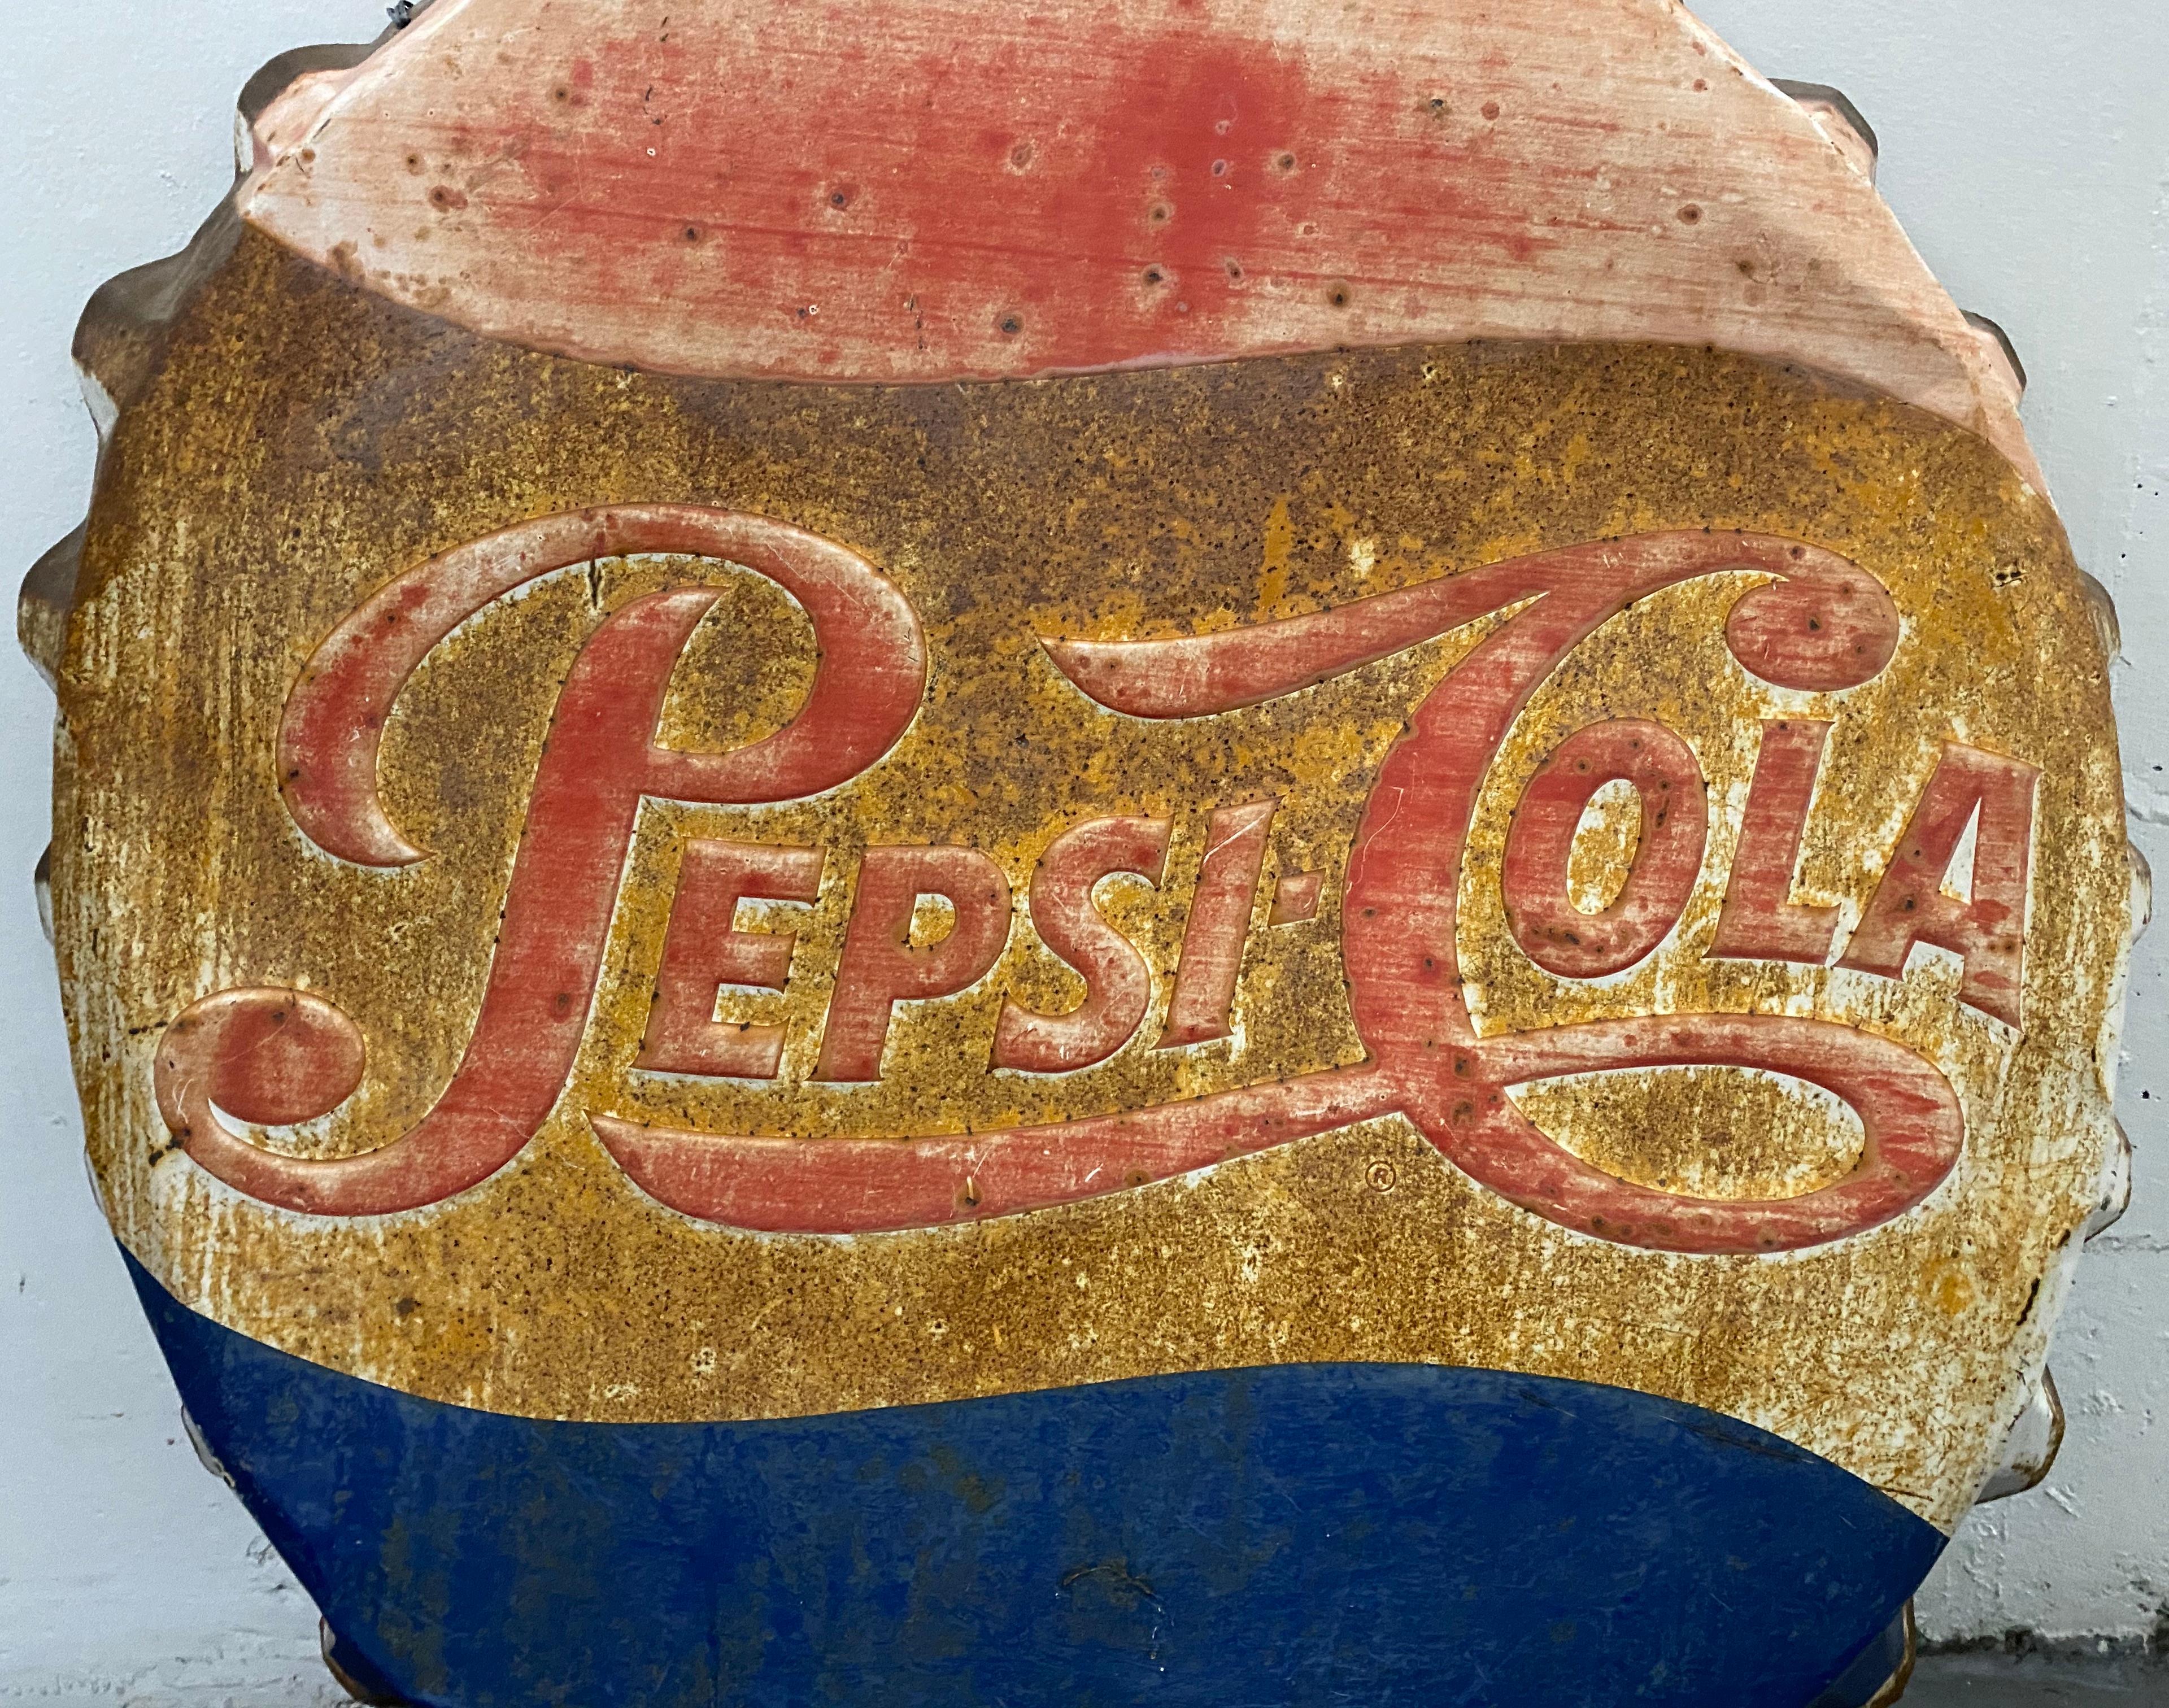 Large scale vintage Pepsi-Cola bottle CAP Metal Advertising Sign, circa 1940

Ample remains of original painting, some surface rust from outdoor use

A Classic advertising sign

Dimensions: 38